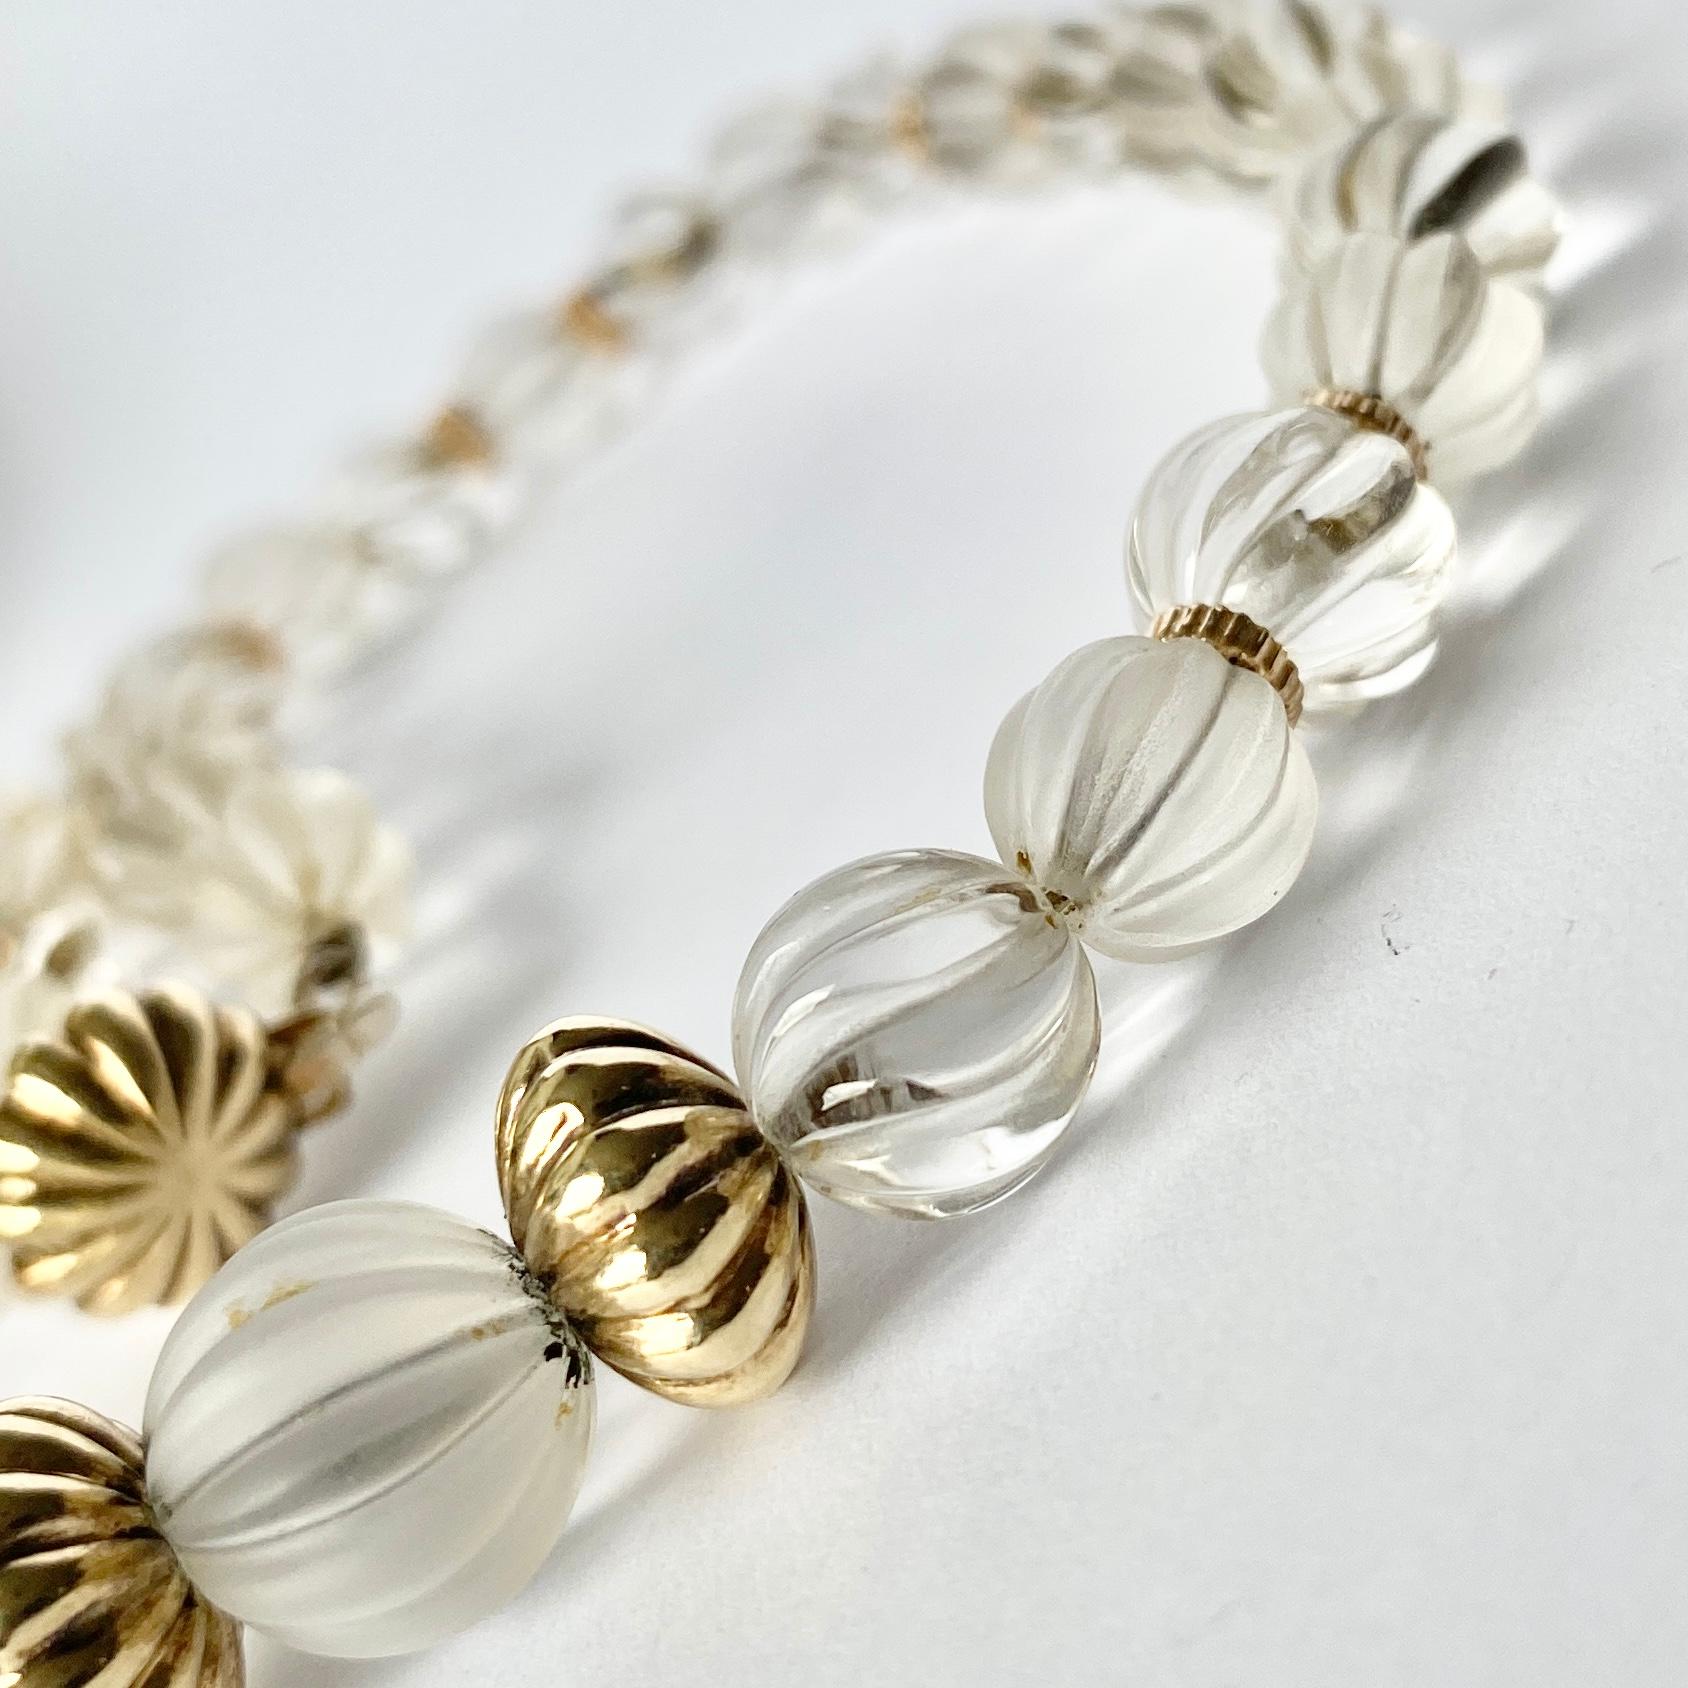 This gorgeous necklace is made of clear rock crystal with a matte effect and a shiny effect. The gold beads between are modelled in 9ct gold. 

Length: 43.5cm
Bead Diameter: 8-14mm

Weight: 38.2g